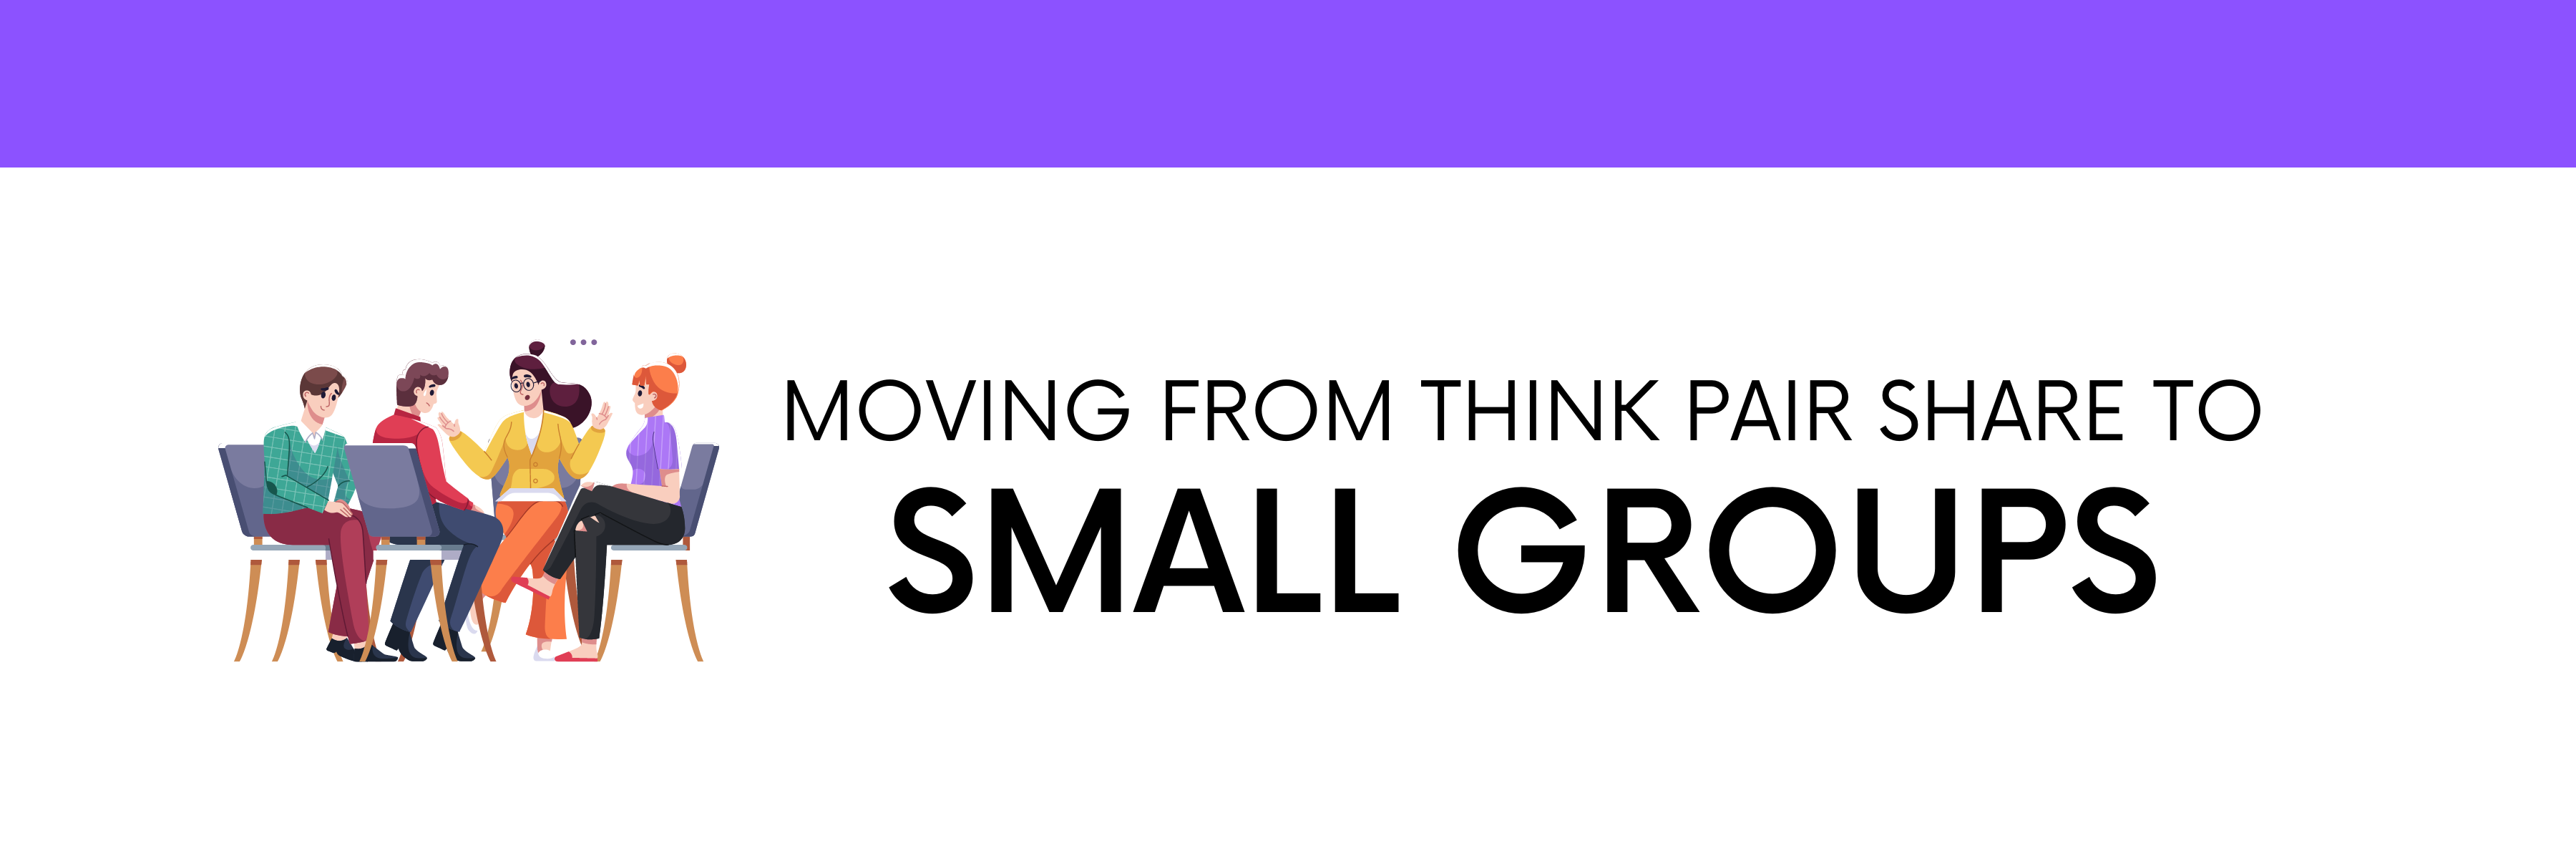 Moving from Think Pair Share to Small Groups Header